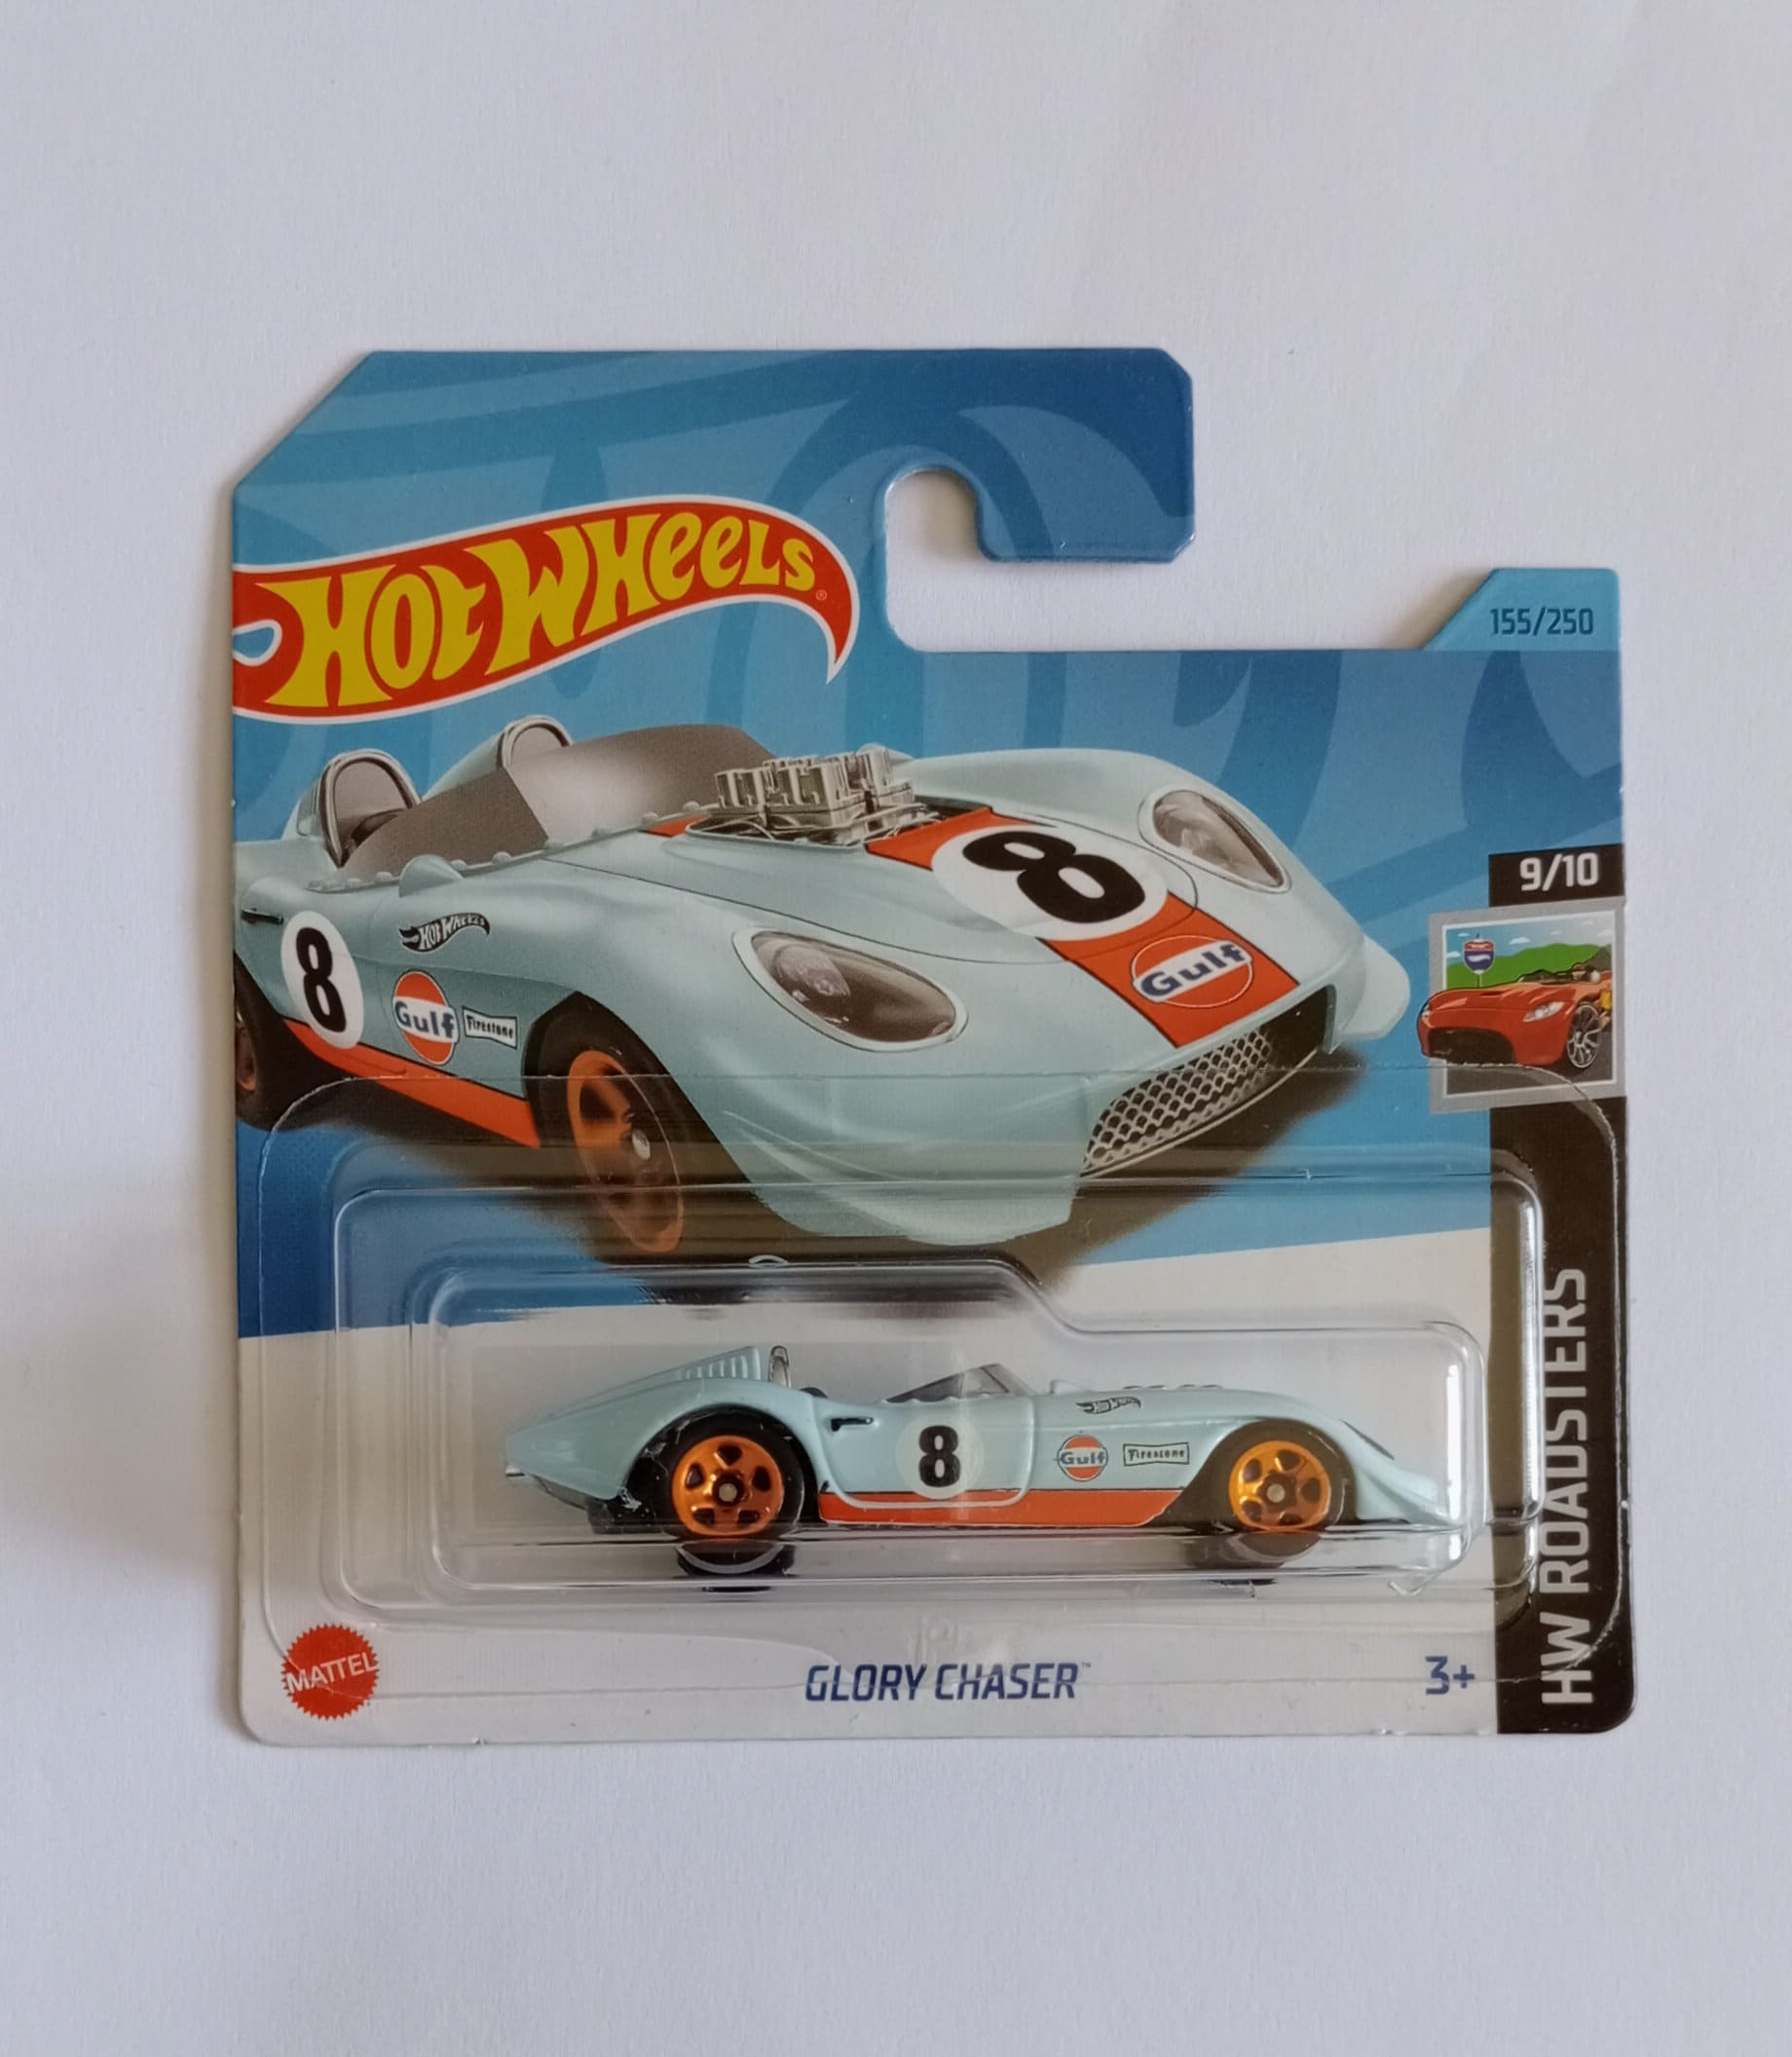 Collectible Hot Wheels Glory Chaser 164 Scale Beautiful Gift